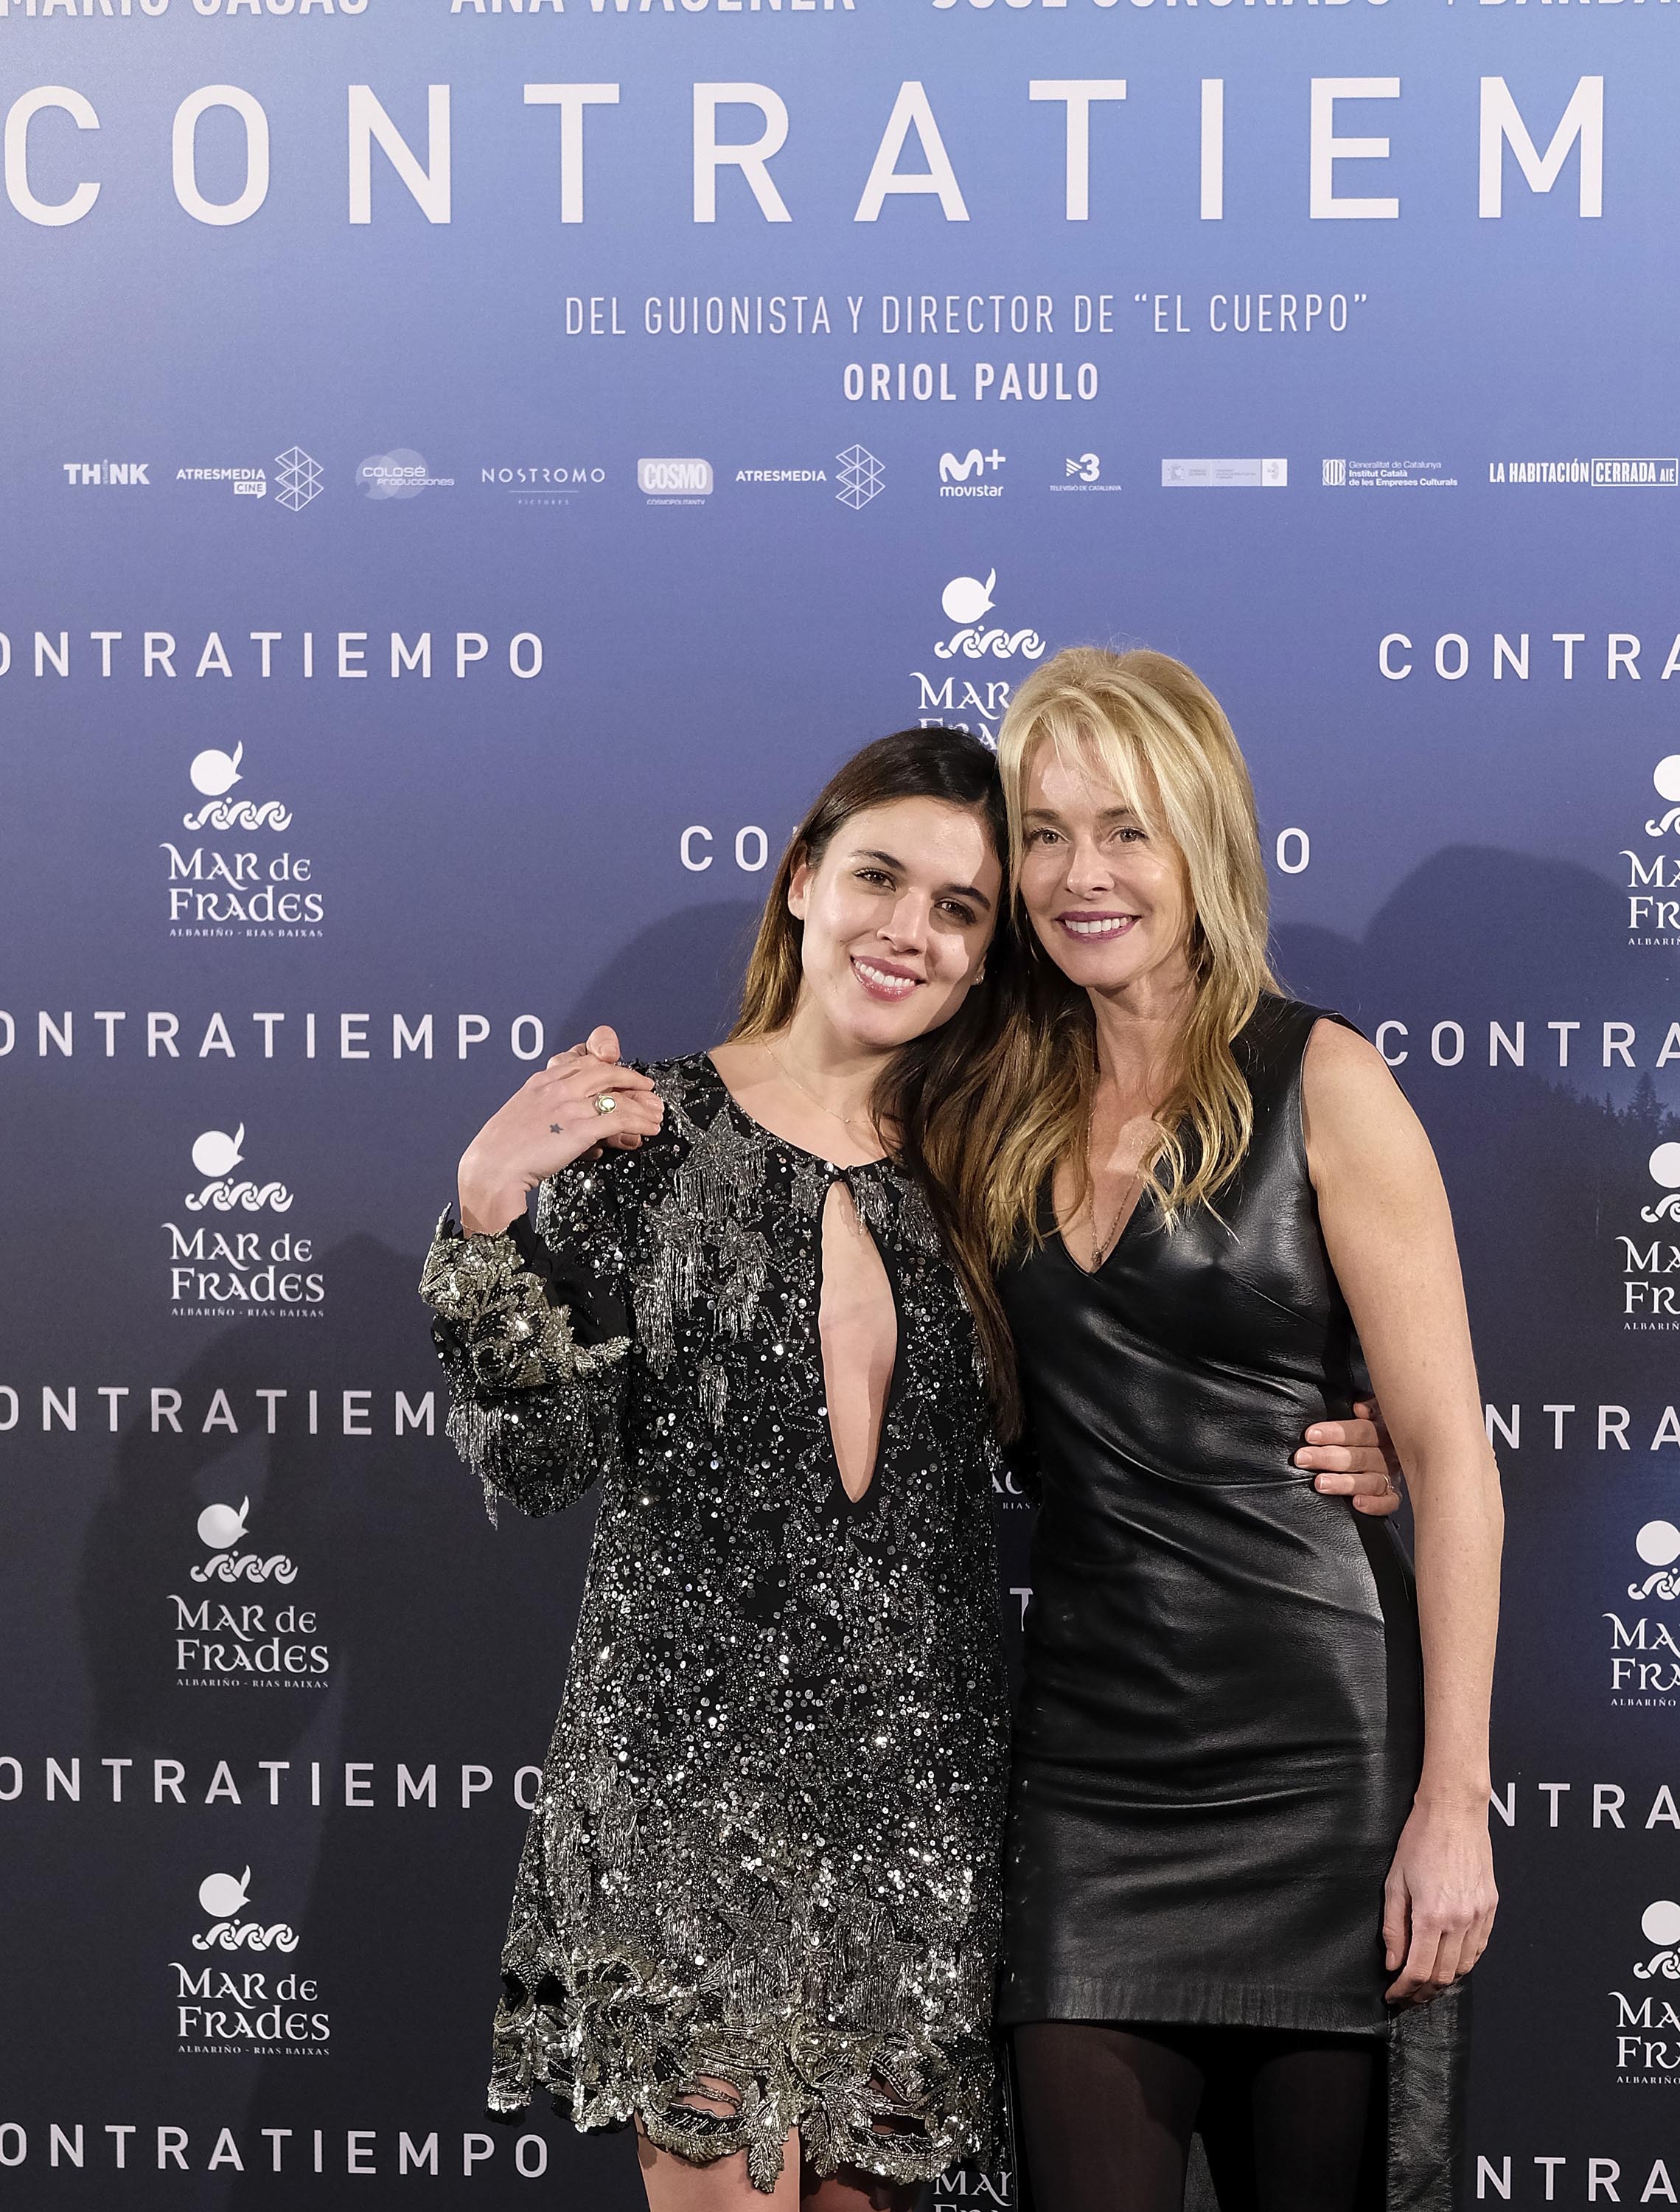 Belen Rueda attends the Contratiempo premiere party photocall